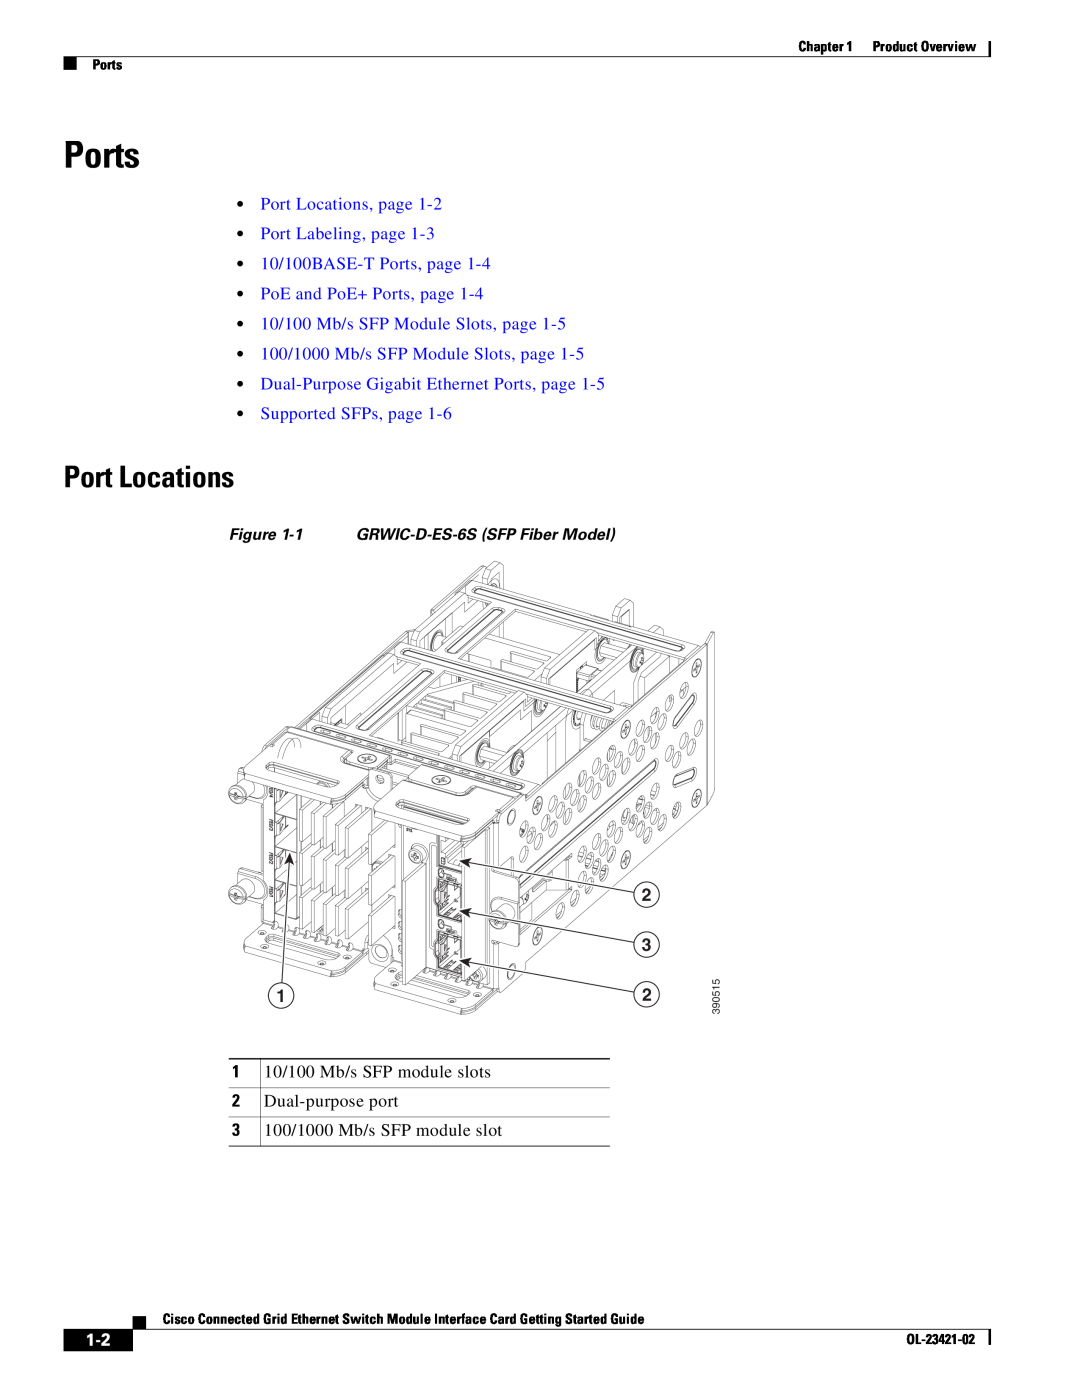 Cisco Systems OL-23421-02 manual Port Locations, page Port Labeling, page 10/100BASE-T Ports, page 